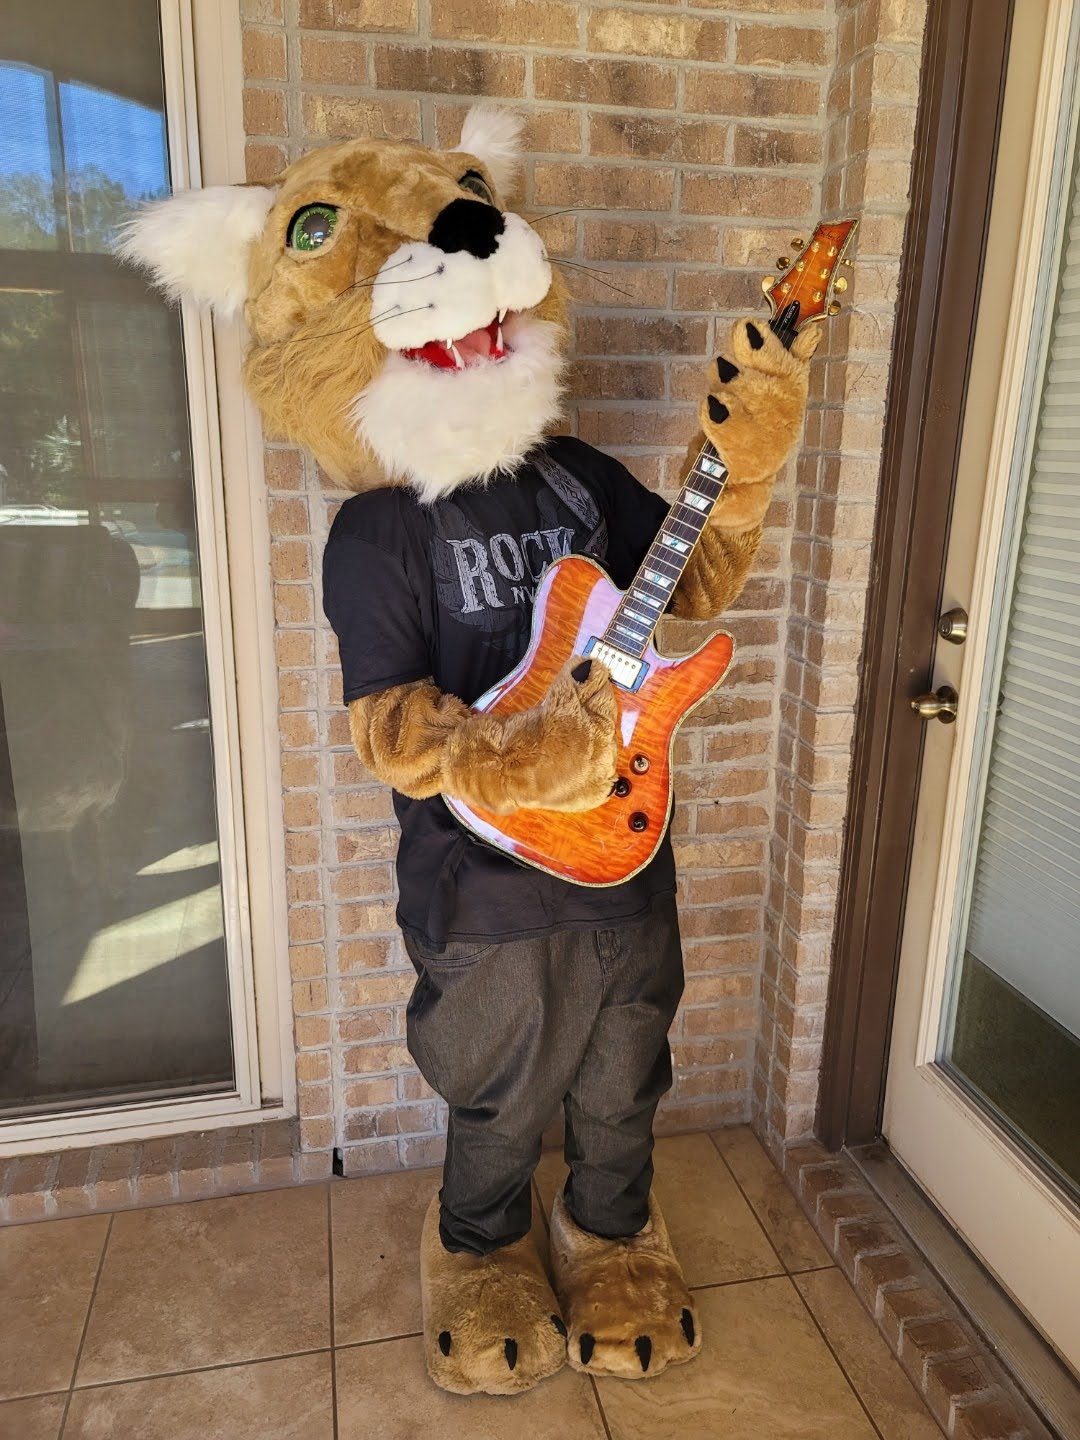    Me, as Wildcat Willie during themed photoshoots for an online magazine!   